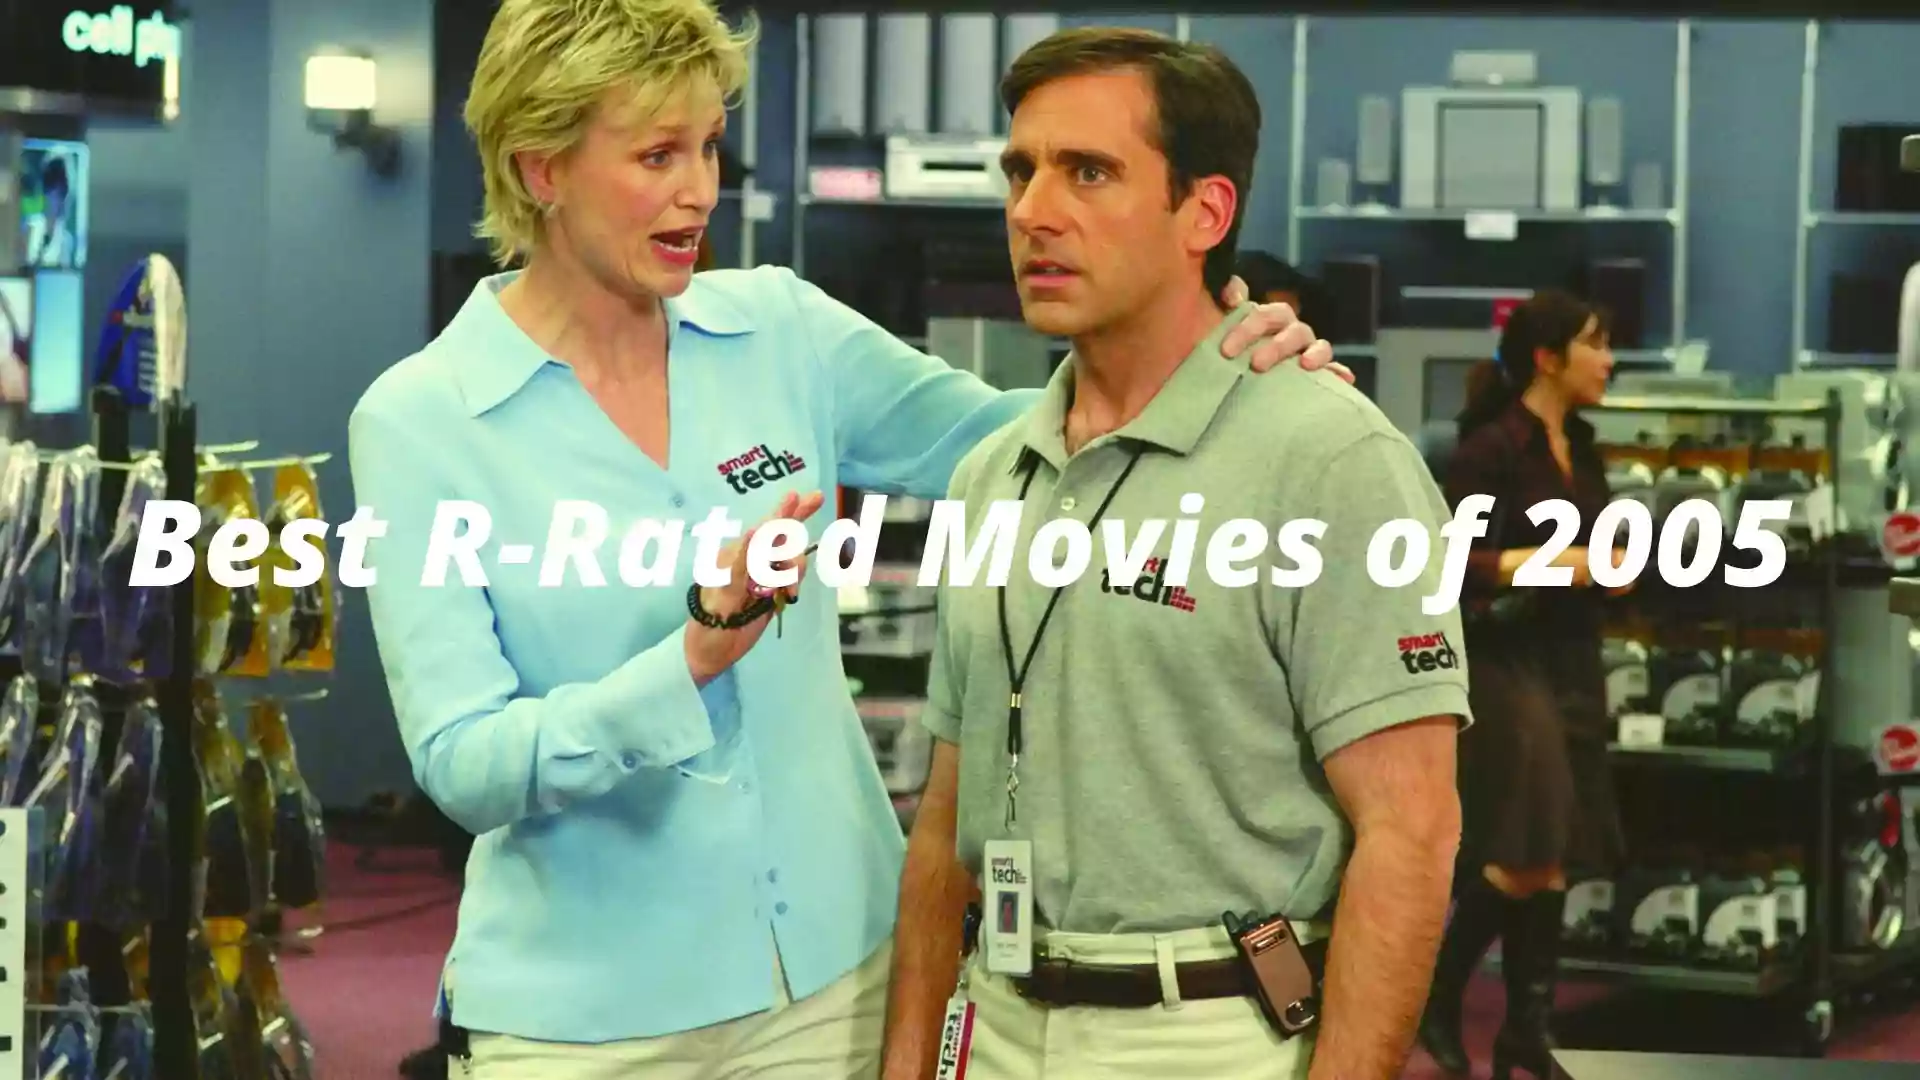 Best R-Rated Movies of 2005